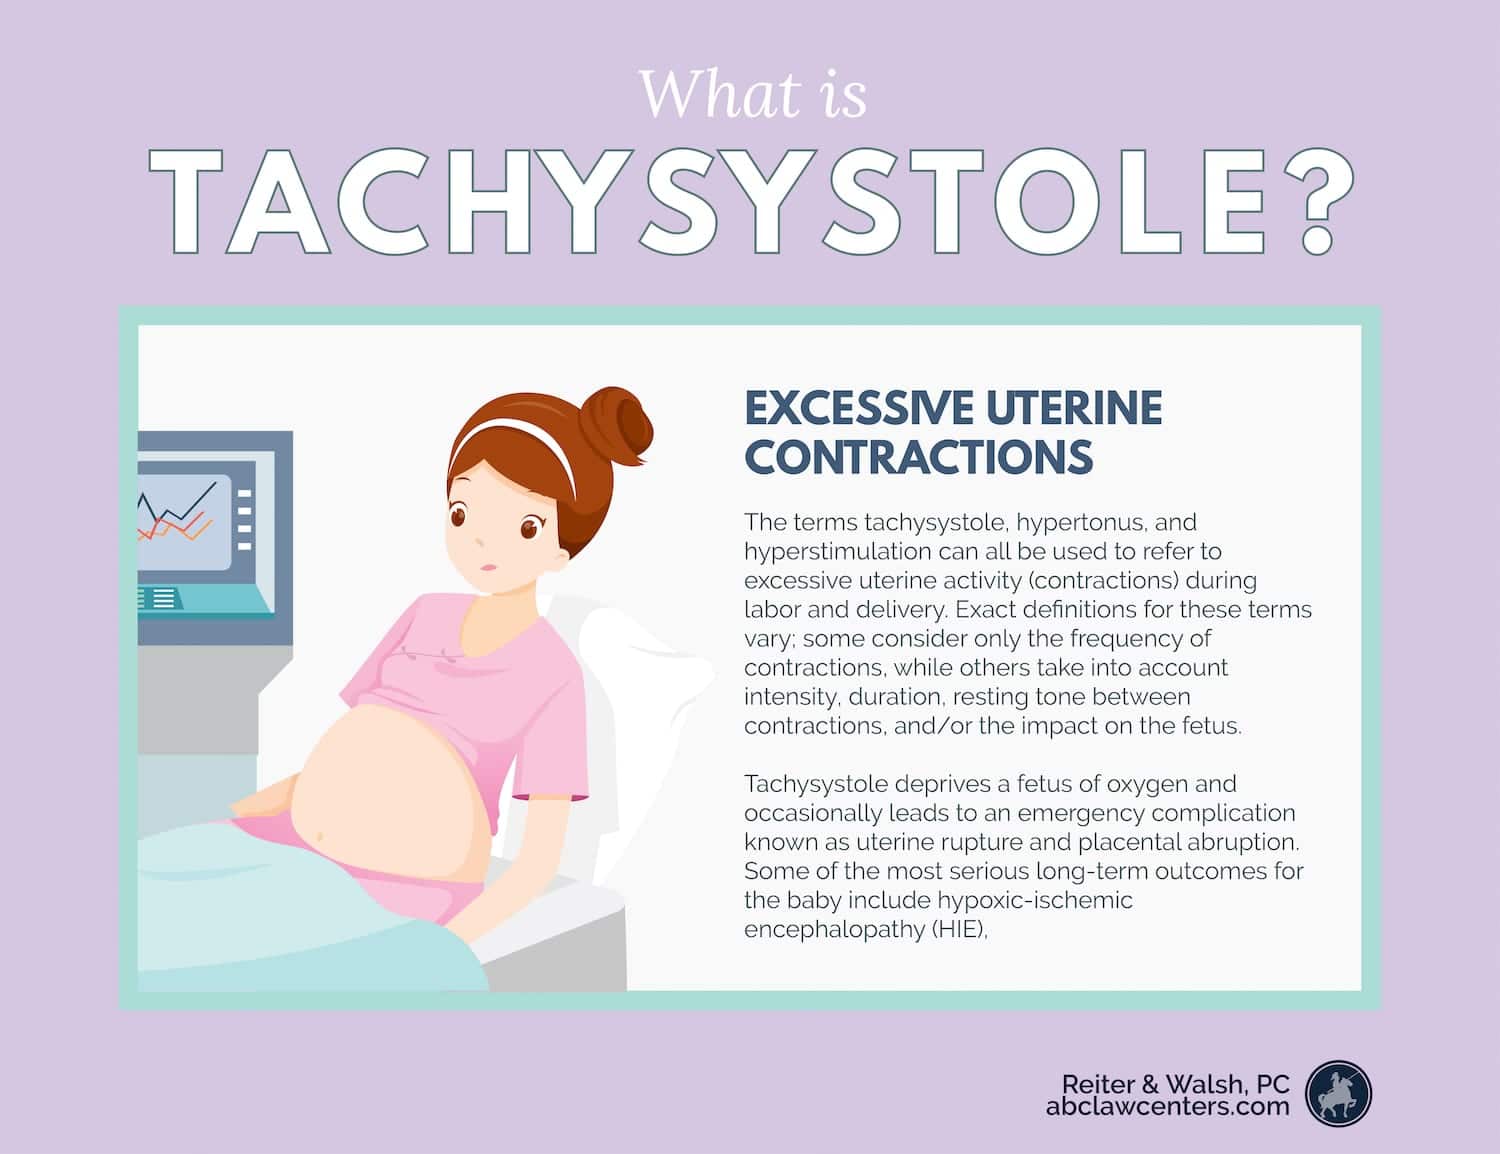 Tachysystole - Excessive Uterine Contractions